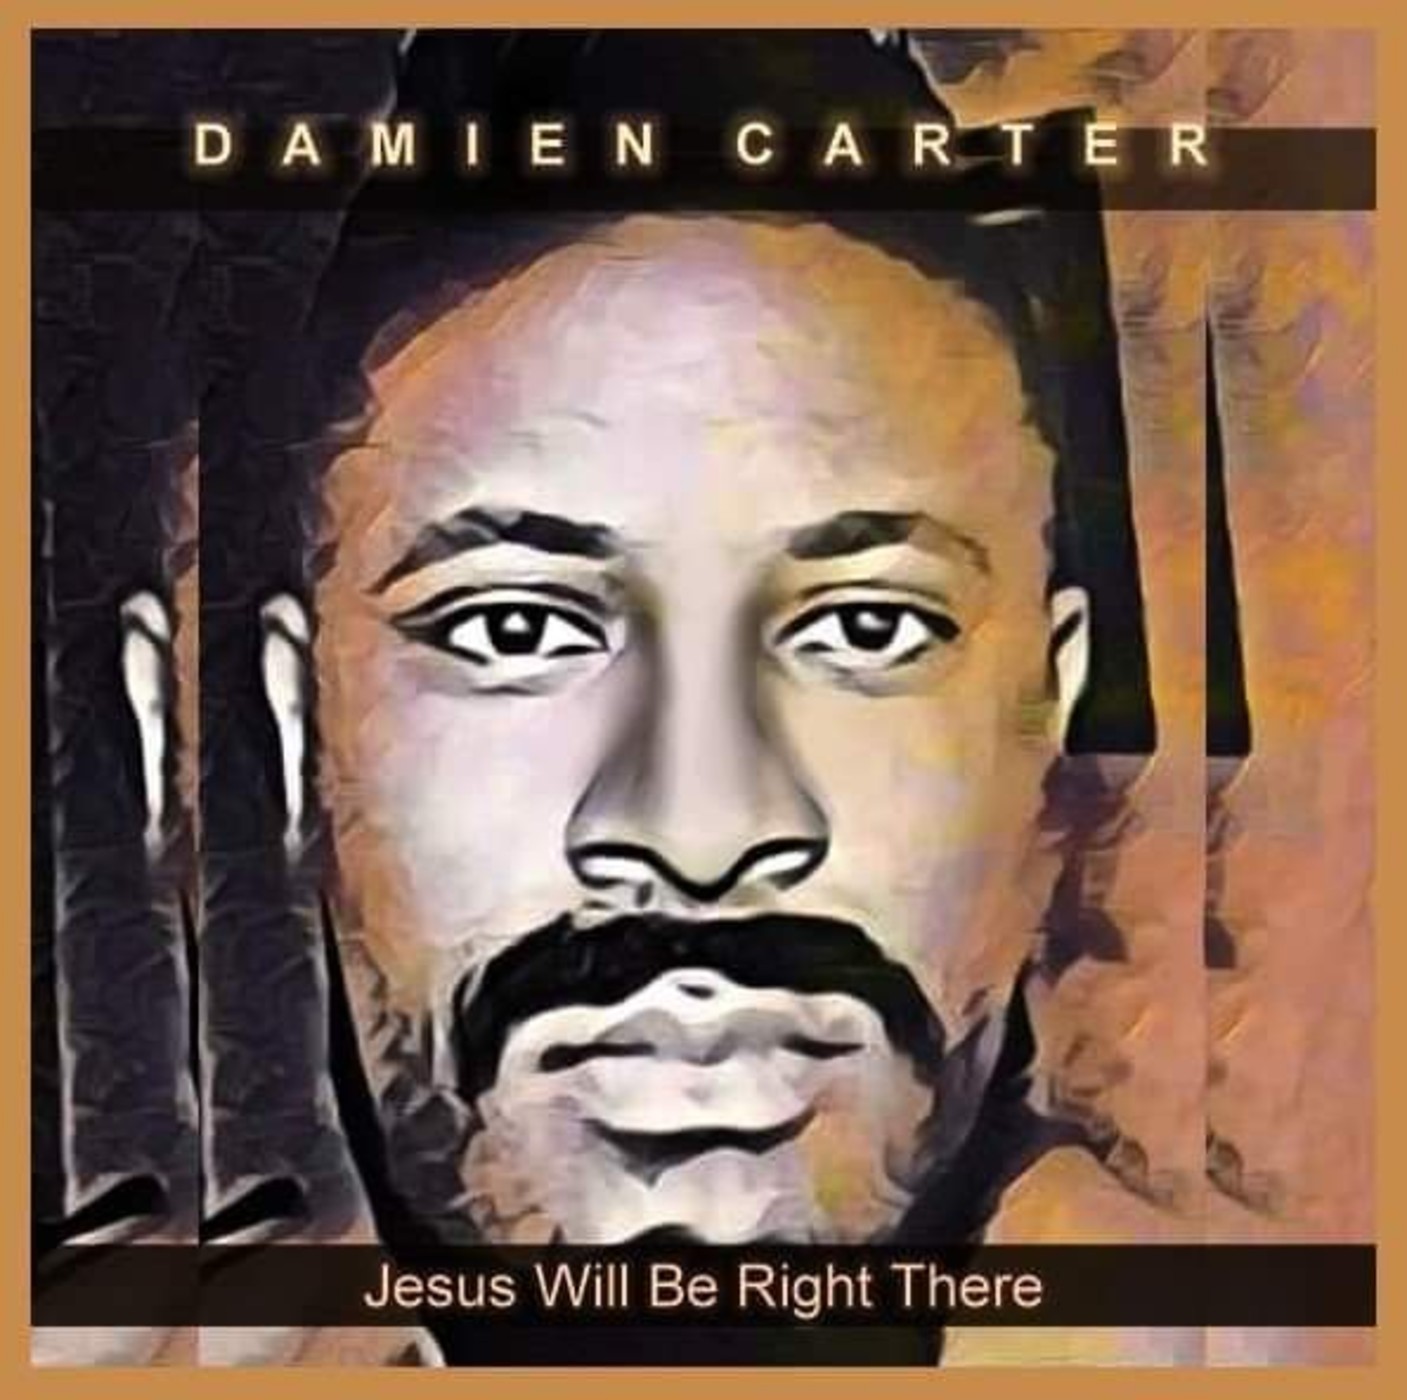 Healing From A Stroke And Finding the Light of Jesus through Empowering Music: Eclectic Artist Damien D Carter Releases His New Single "Jesus Will Be Right There"